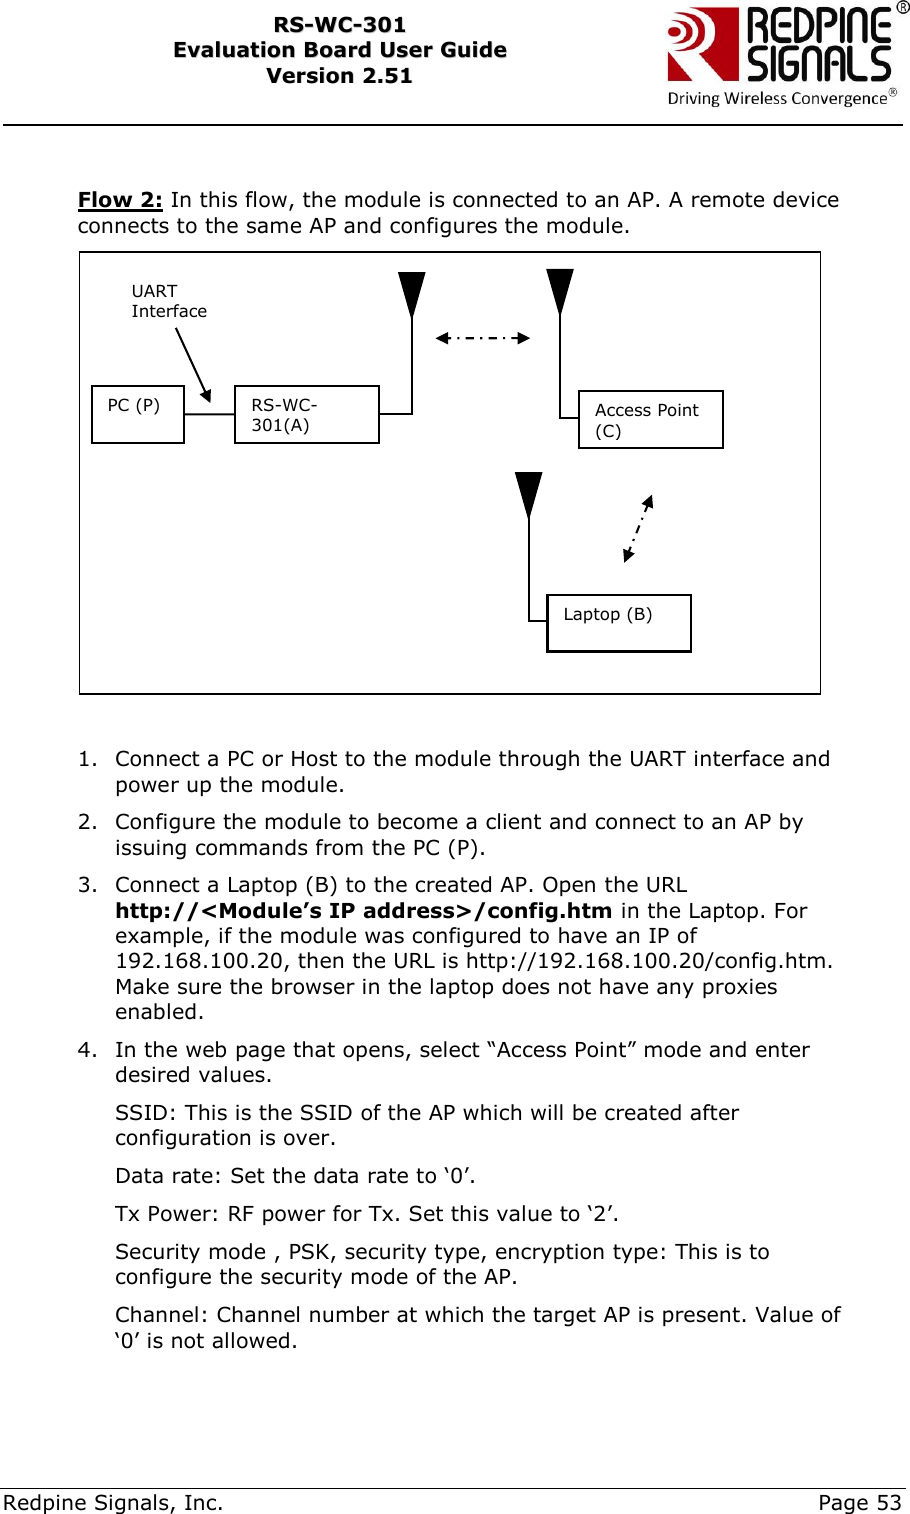     Redpine Signals, Inc.     Page 53 RRSS--WWCC--330011    EEvvaalluuaattiioonn  BBooaarrdd  UUsseerr  GGuuiiddee  VVeerrssiioonn  22..5511     Flow 2: In this flow, the module is connected to an AP. A remote device connects to the same AP and configures the module.   1. Connect a PC or Host to the module through the UART interface and power up the module. 2. Configure the module to become a client and connect to an AP by issuing commands from the PC (P). 3. Connect a Laptop (B) to the created AP. Open the URL http://&lt;Module’s IP address&gt;/config.htm in the Laptop. For example, if the module was configured to have an IP of 192.168.100.20, then the URL is http://192.168.100.20/config.htm. Make sure the browser in the laptop does not have any proxies enabled. 4. In the web page that opens, select “Access Point” mode and enter desired values.  SSID: This is the SSID of the AP which will be created after configuration is over. Data rate: Set the data rate to „0‟. Tx Power: RF power for Tx. Set this value to „2‟. Security mode , PSK, security type, encryption type: This is to configure the security mode of the AP. Channel: Channel number at which the target AP is present. Value of „0‟ is not allowed. PC (P) RS-WC-301(A) UART Interface Access Point (C) Laptop (B) 